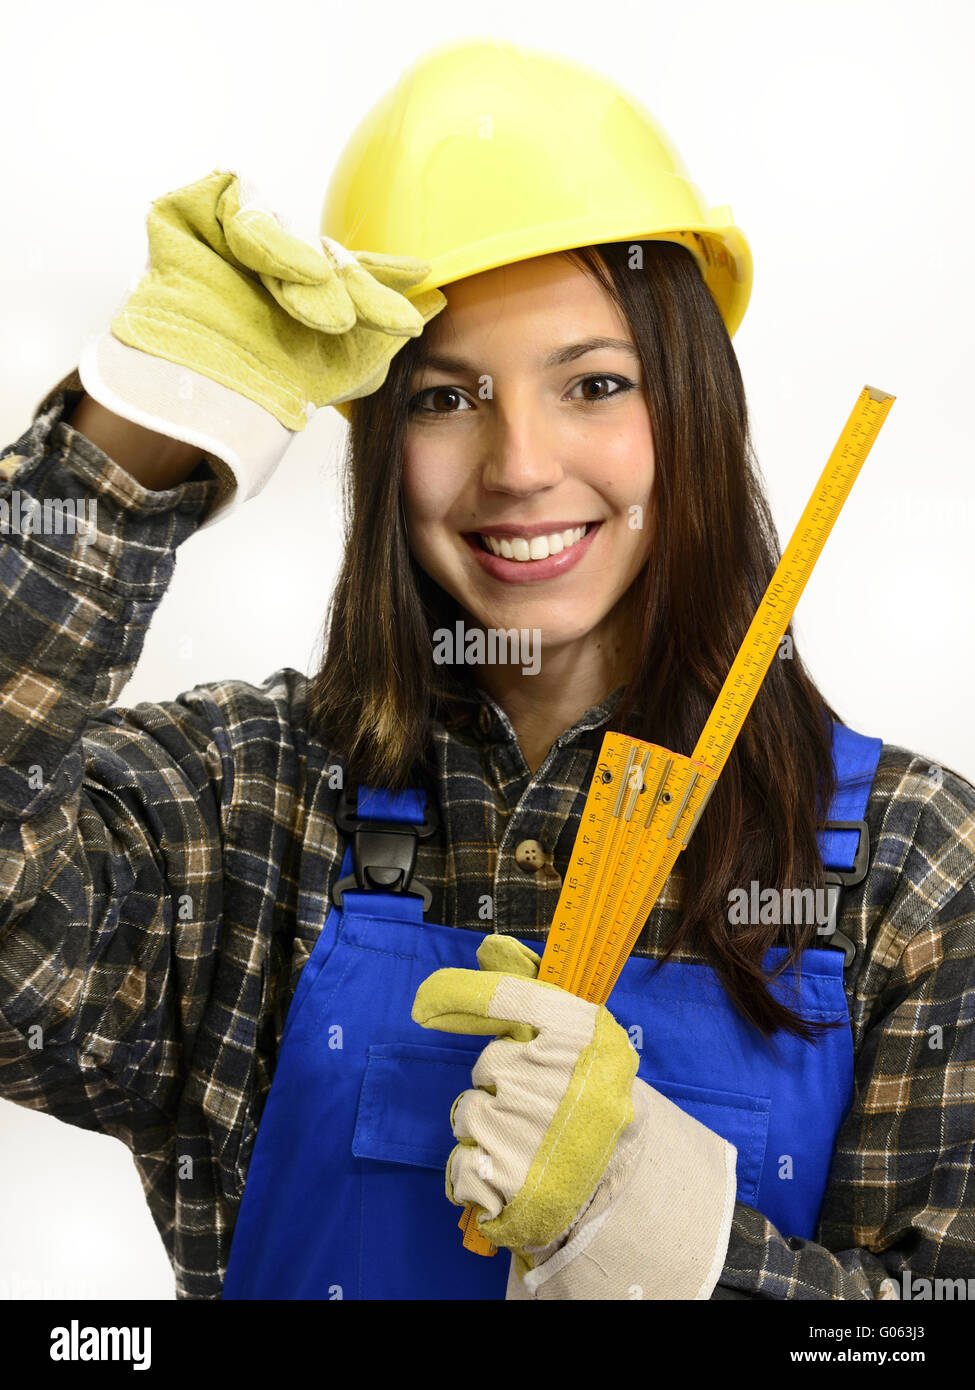 Young woman with helmet and work clothes holding a Stock Photo